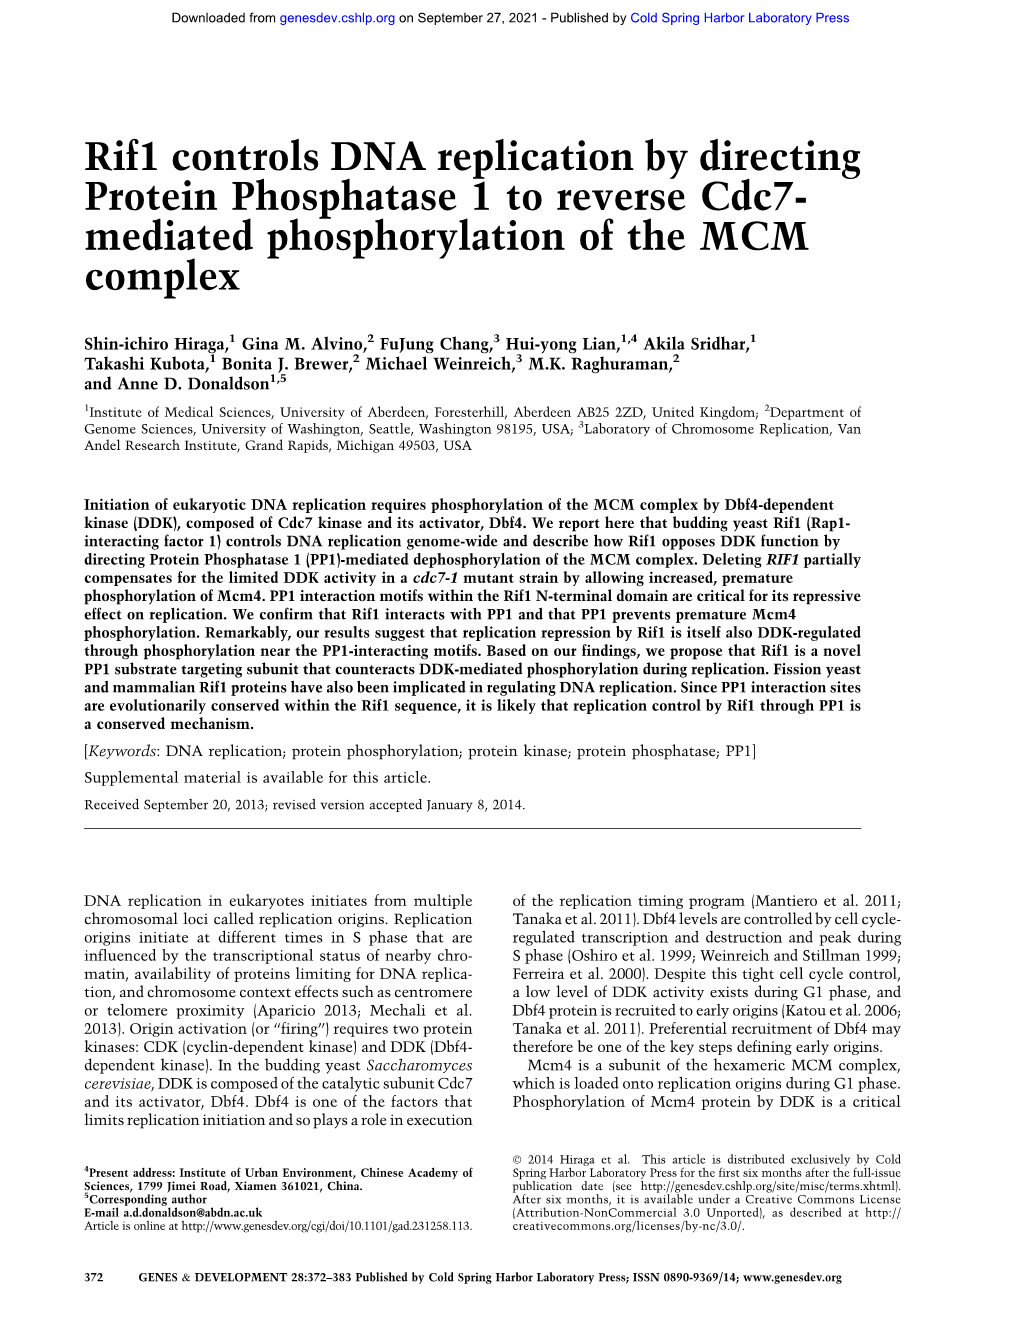 Rif1 Controls DNA Replication by Directing Protein Phosphatase 1 to Reverse Cdc7- Mediated Phosphorylation of the MCM Complex